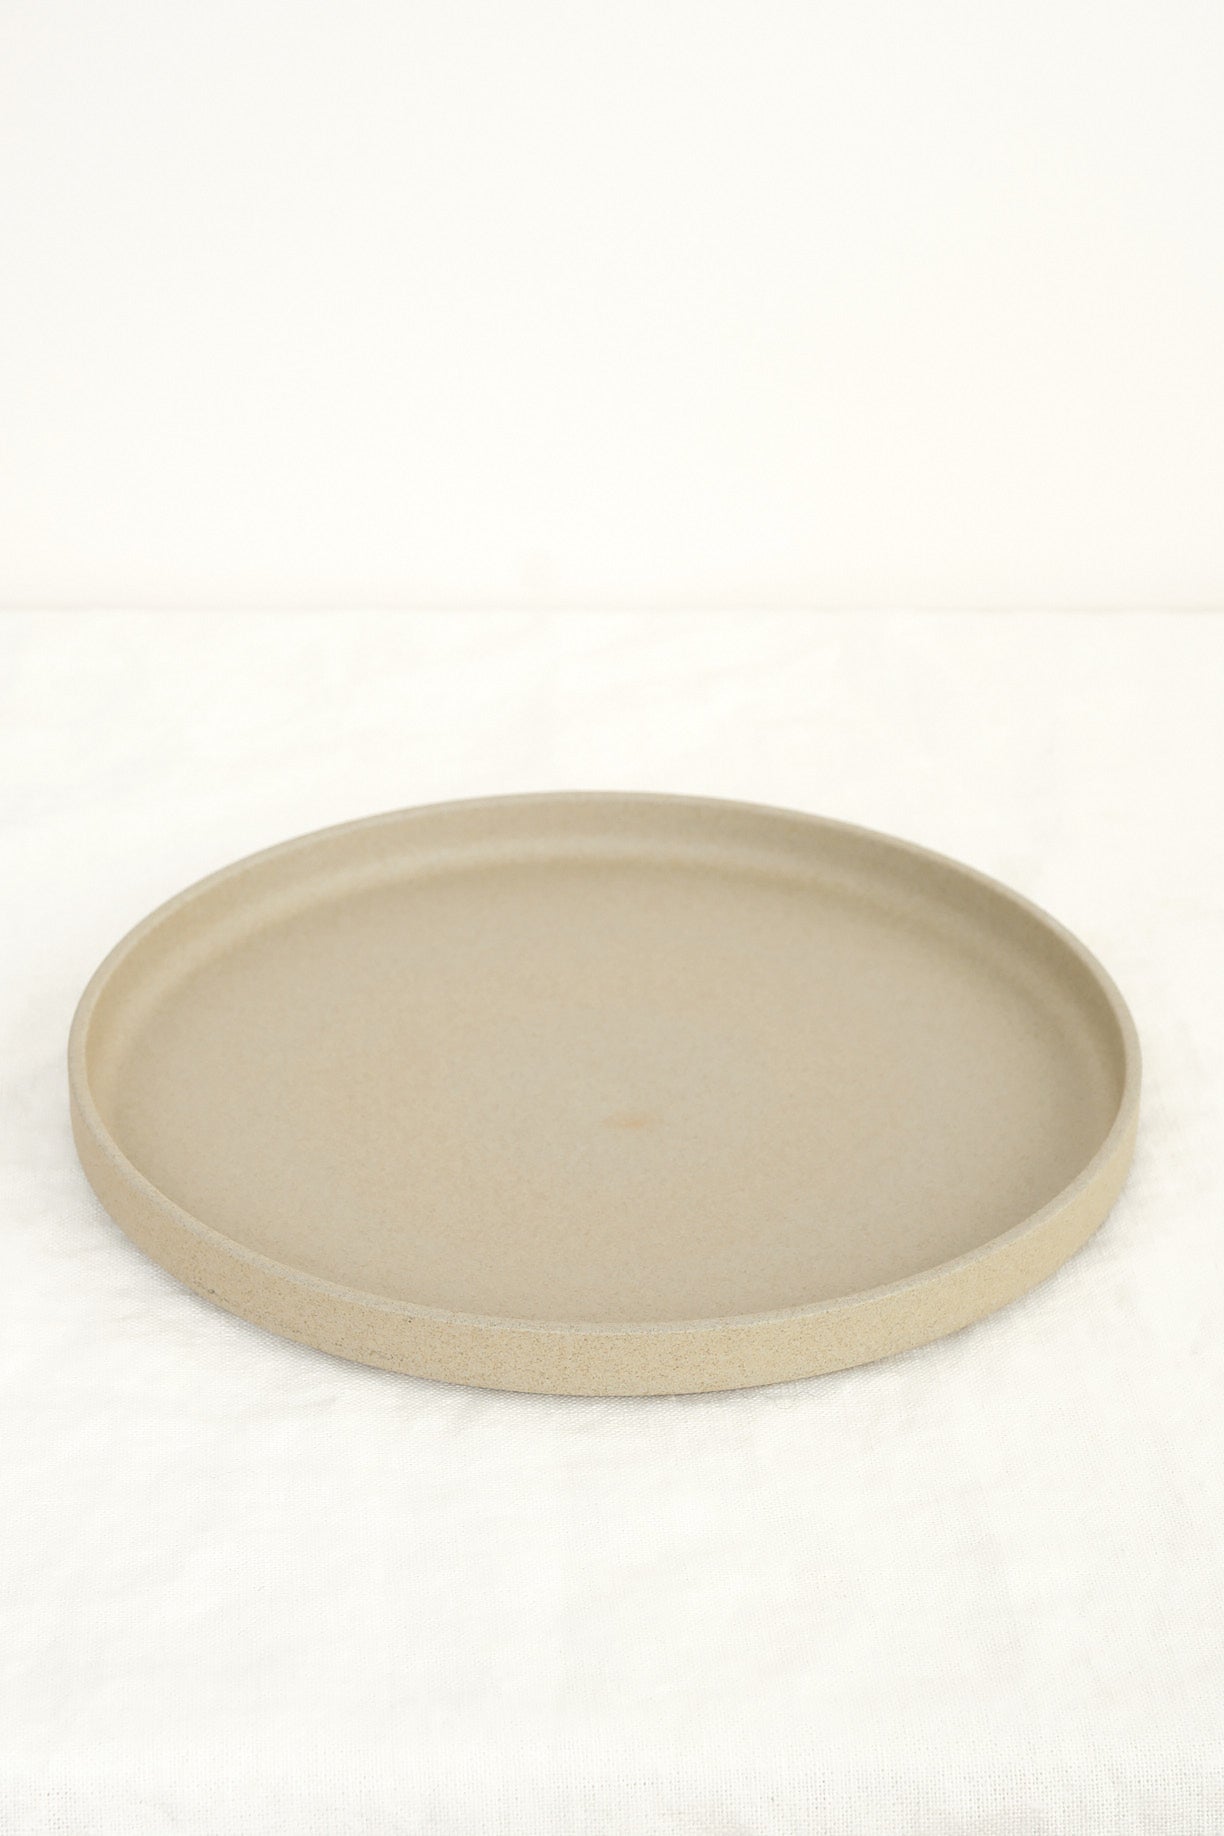 Hasami Porcelain 10 Inch plate in Natural 